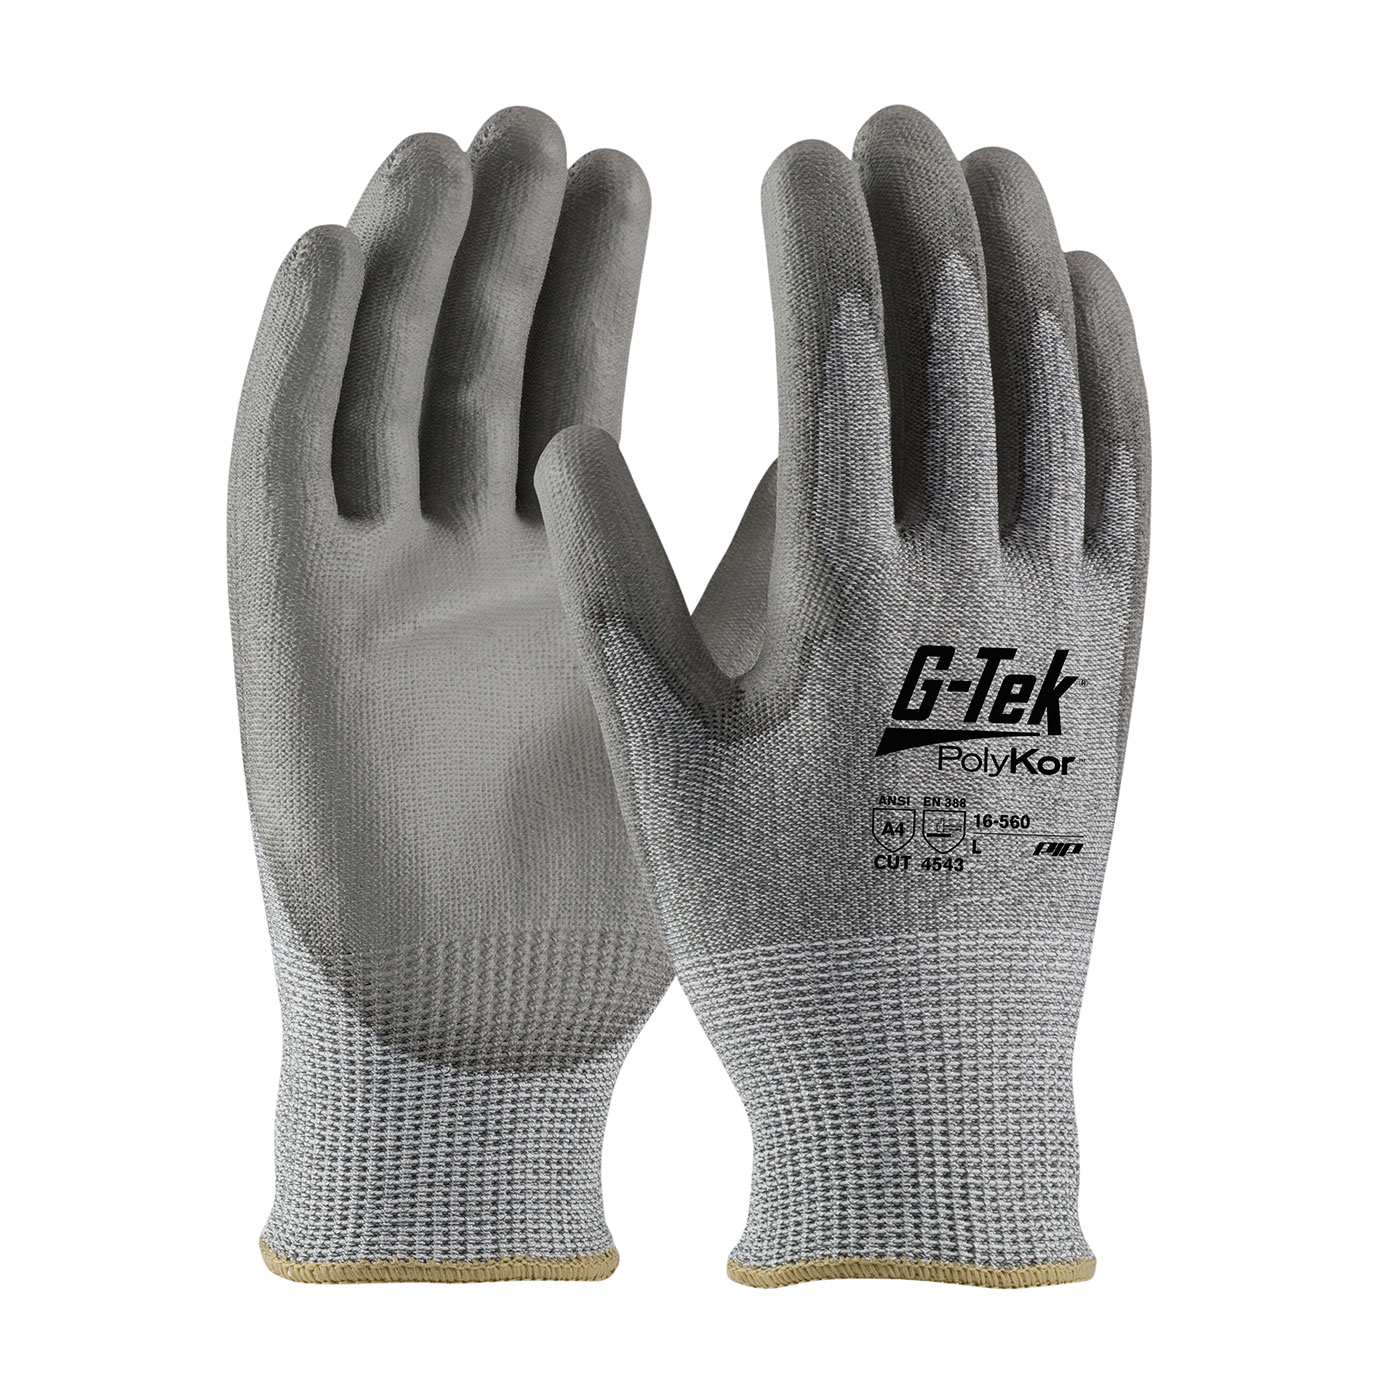 PIP 16-560/L G-Tek PolyKor Seamless Knit PolyKor Blended Glove with Polyurethane Coated Smooth Grip on Palm & Fingers - Large PID-16 560 L